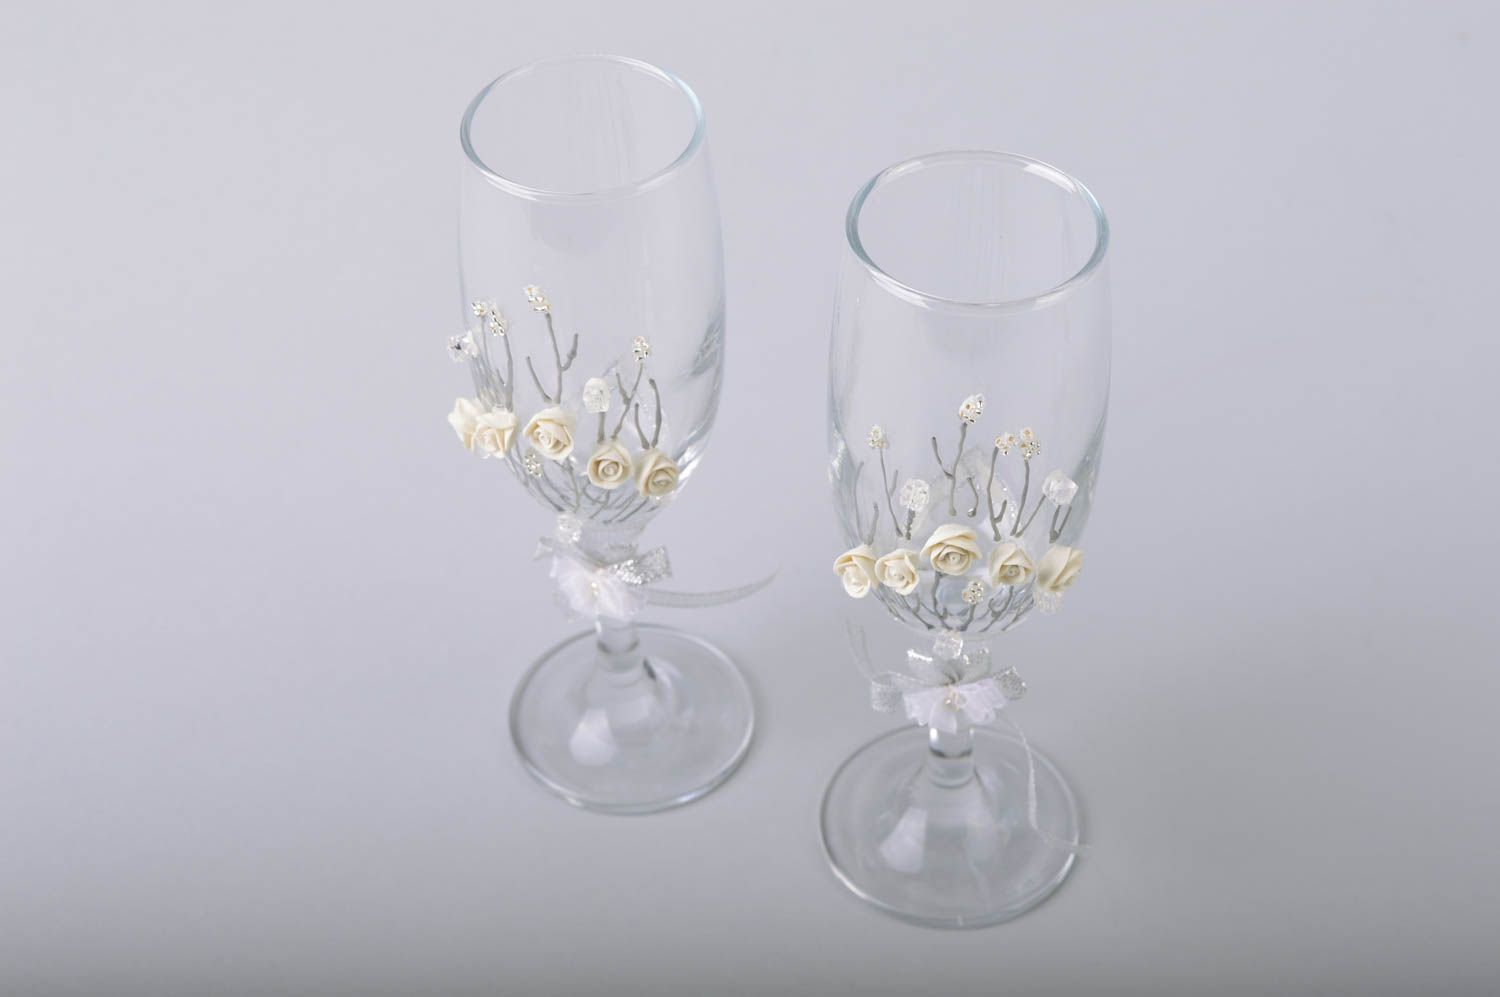 Handmade wedding glasses for champagne with stucco work 2 pieces photo 5